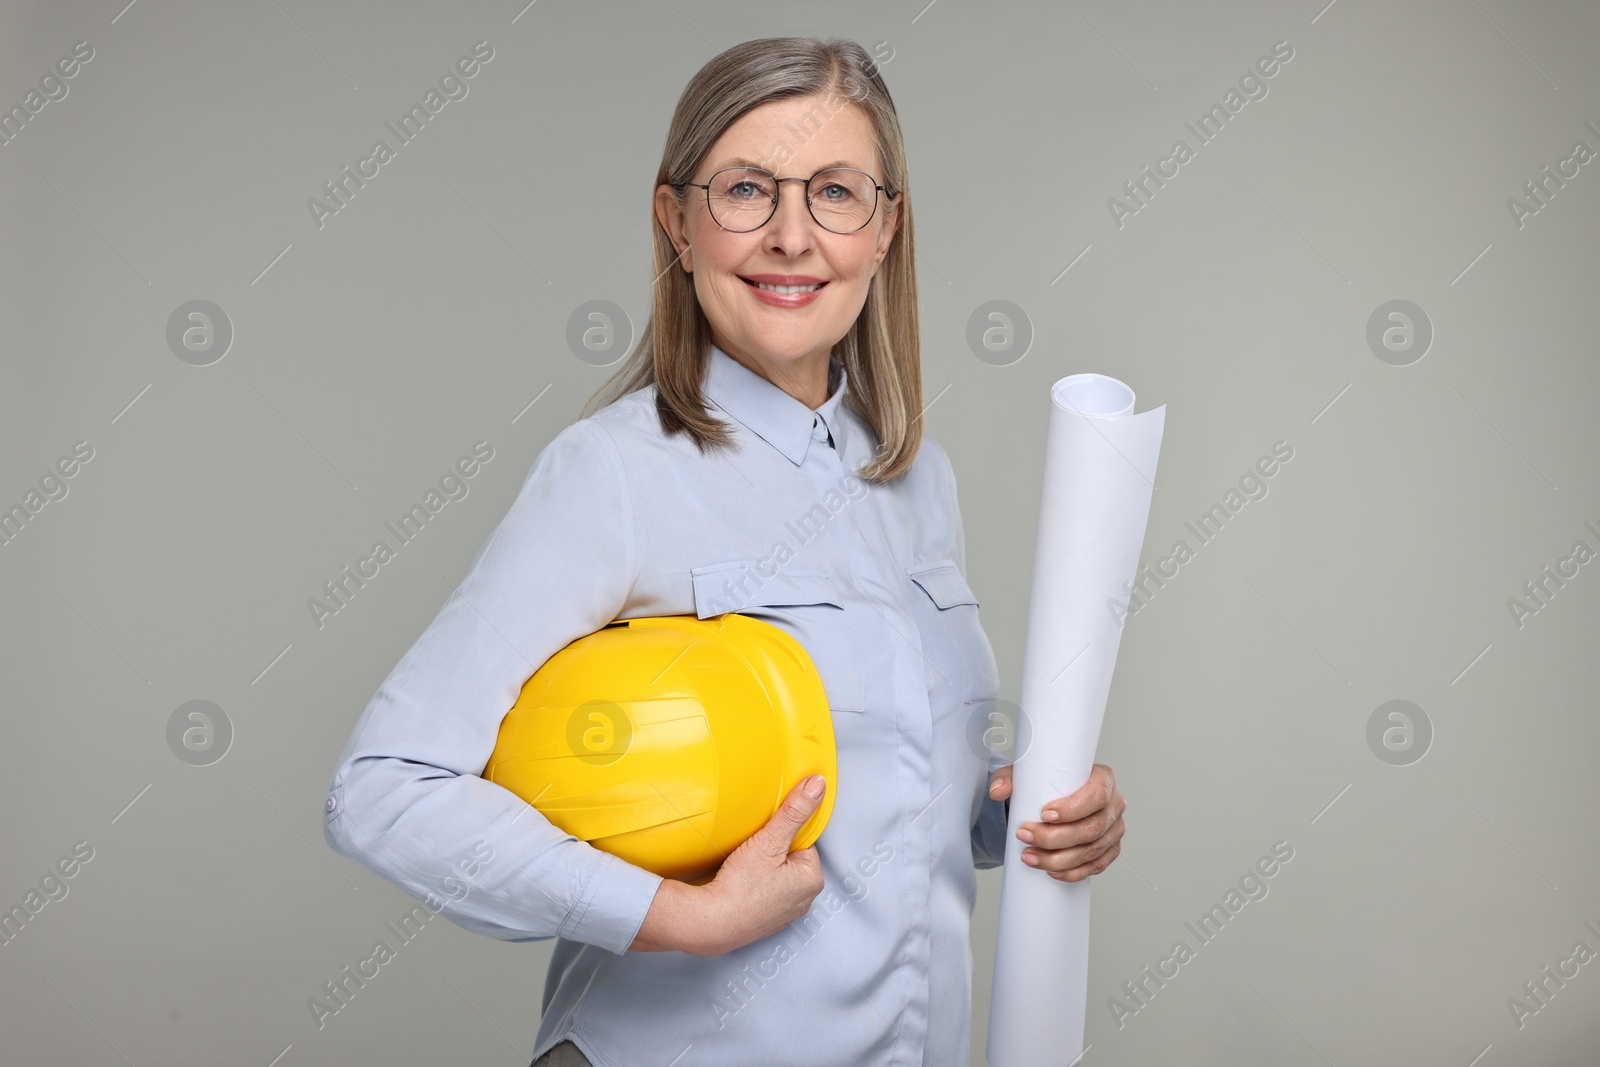 Photo of Architect with hard hat and draft on grey background